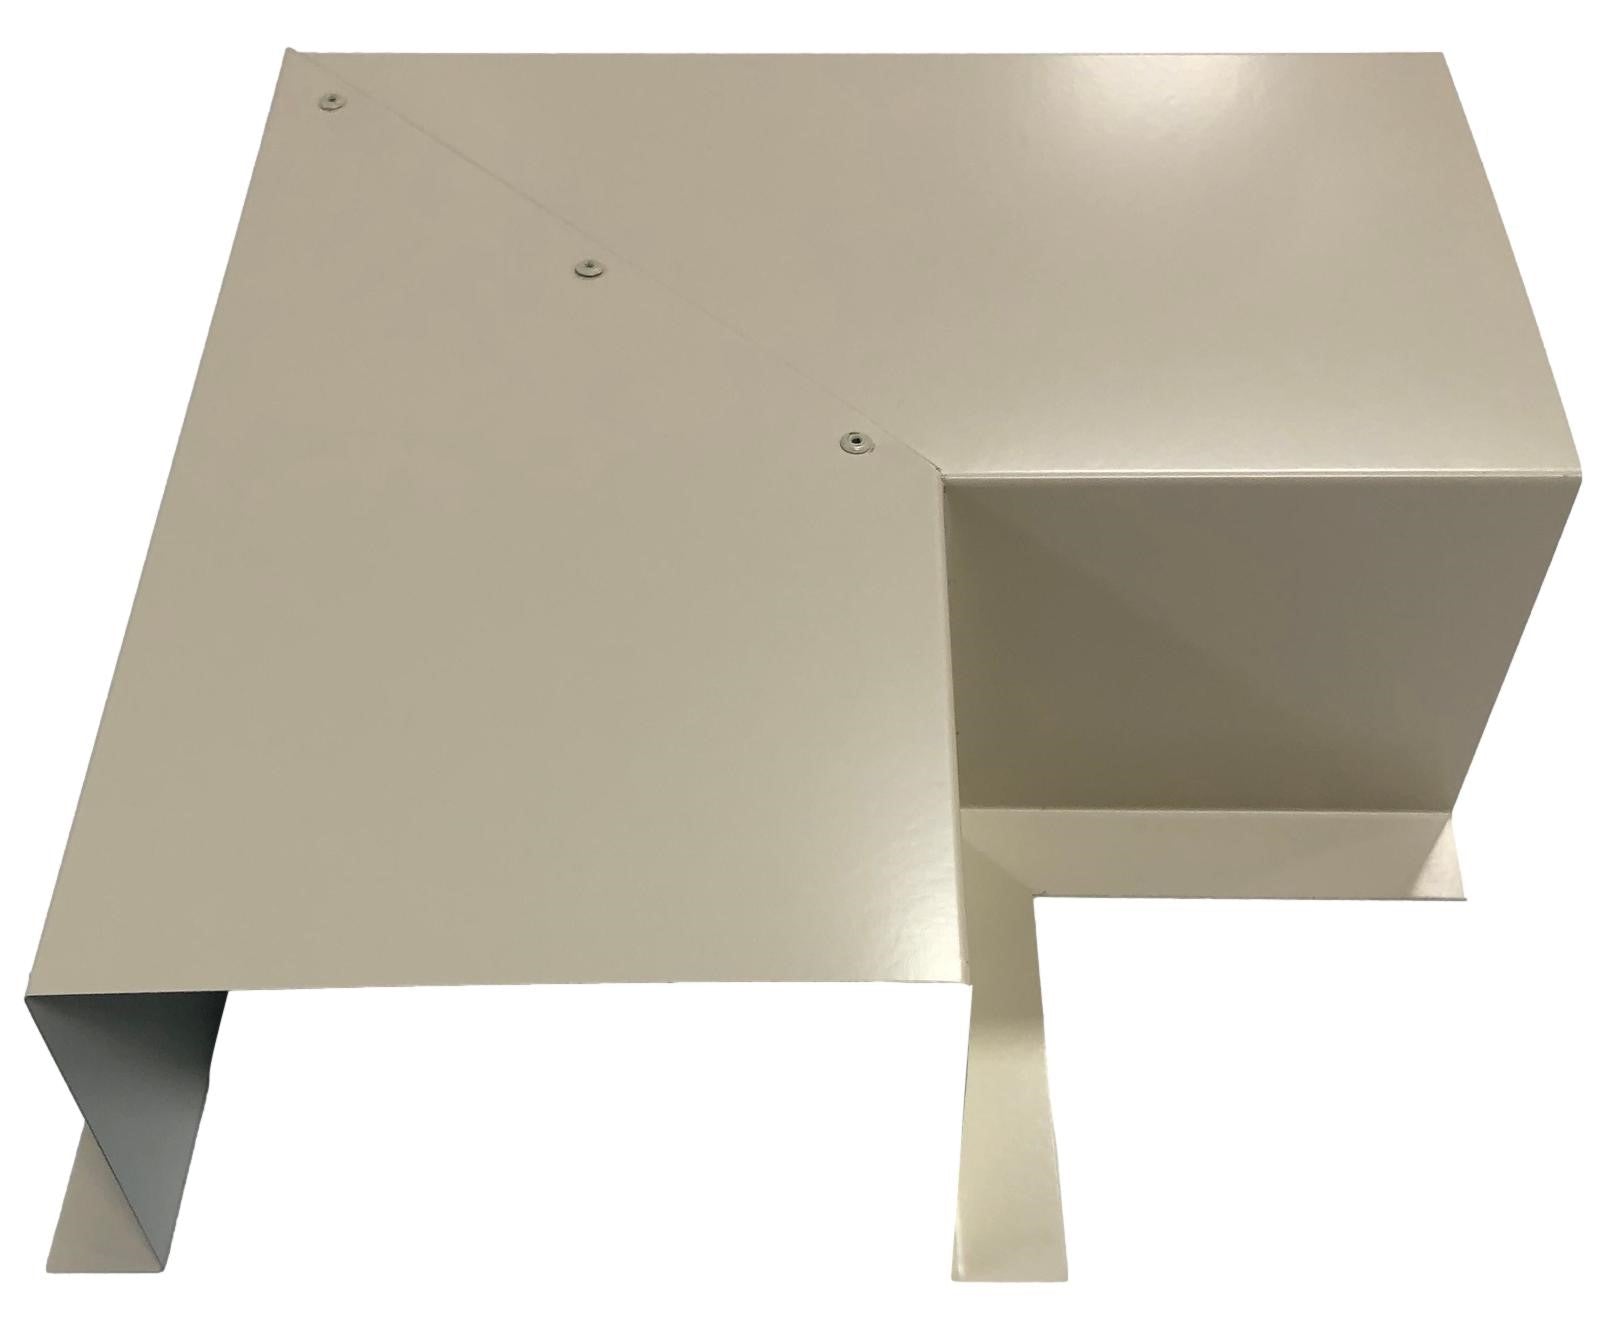 A metallic, cream-colored L-shaped bracket is displayed against a white background. The Perma Cover Residential Series - Line Set Cover Side Turning Elbows - Premium Quality has a few screws visible and features a raised section on one side, likely for mounting or structural support, ensuring easy installation.